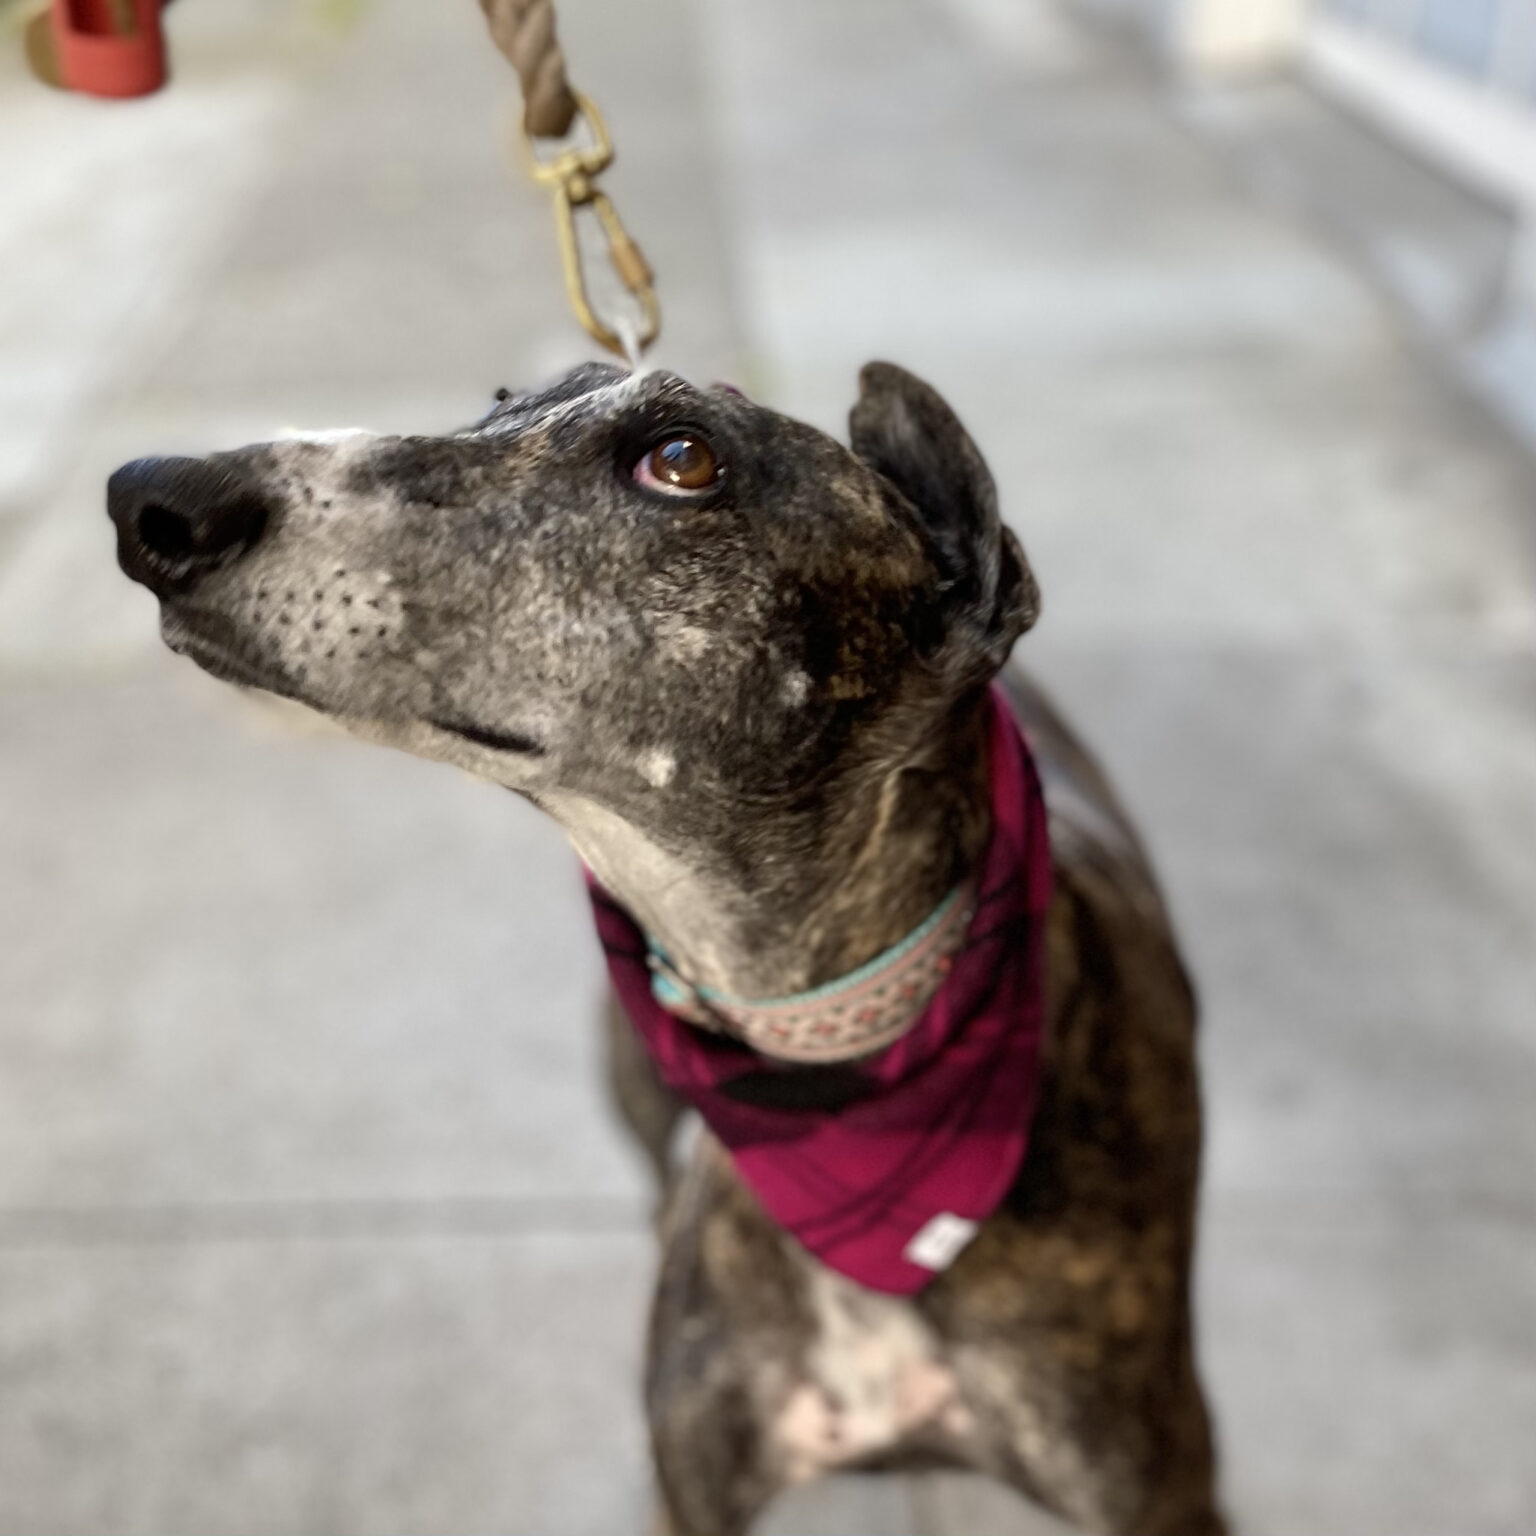 Galgo Español Dog With One Ear Flopped Over On Top Of Her Head